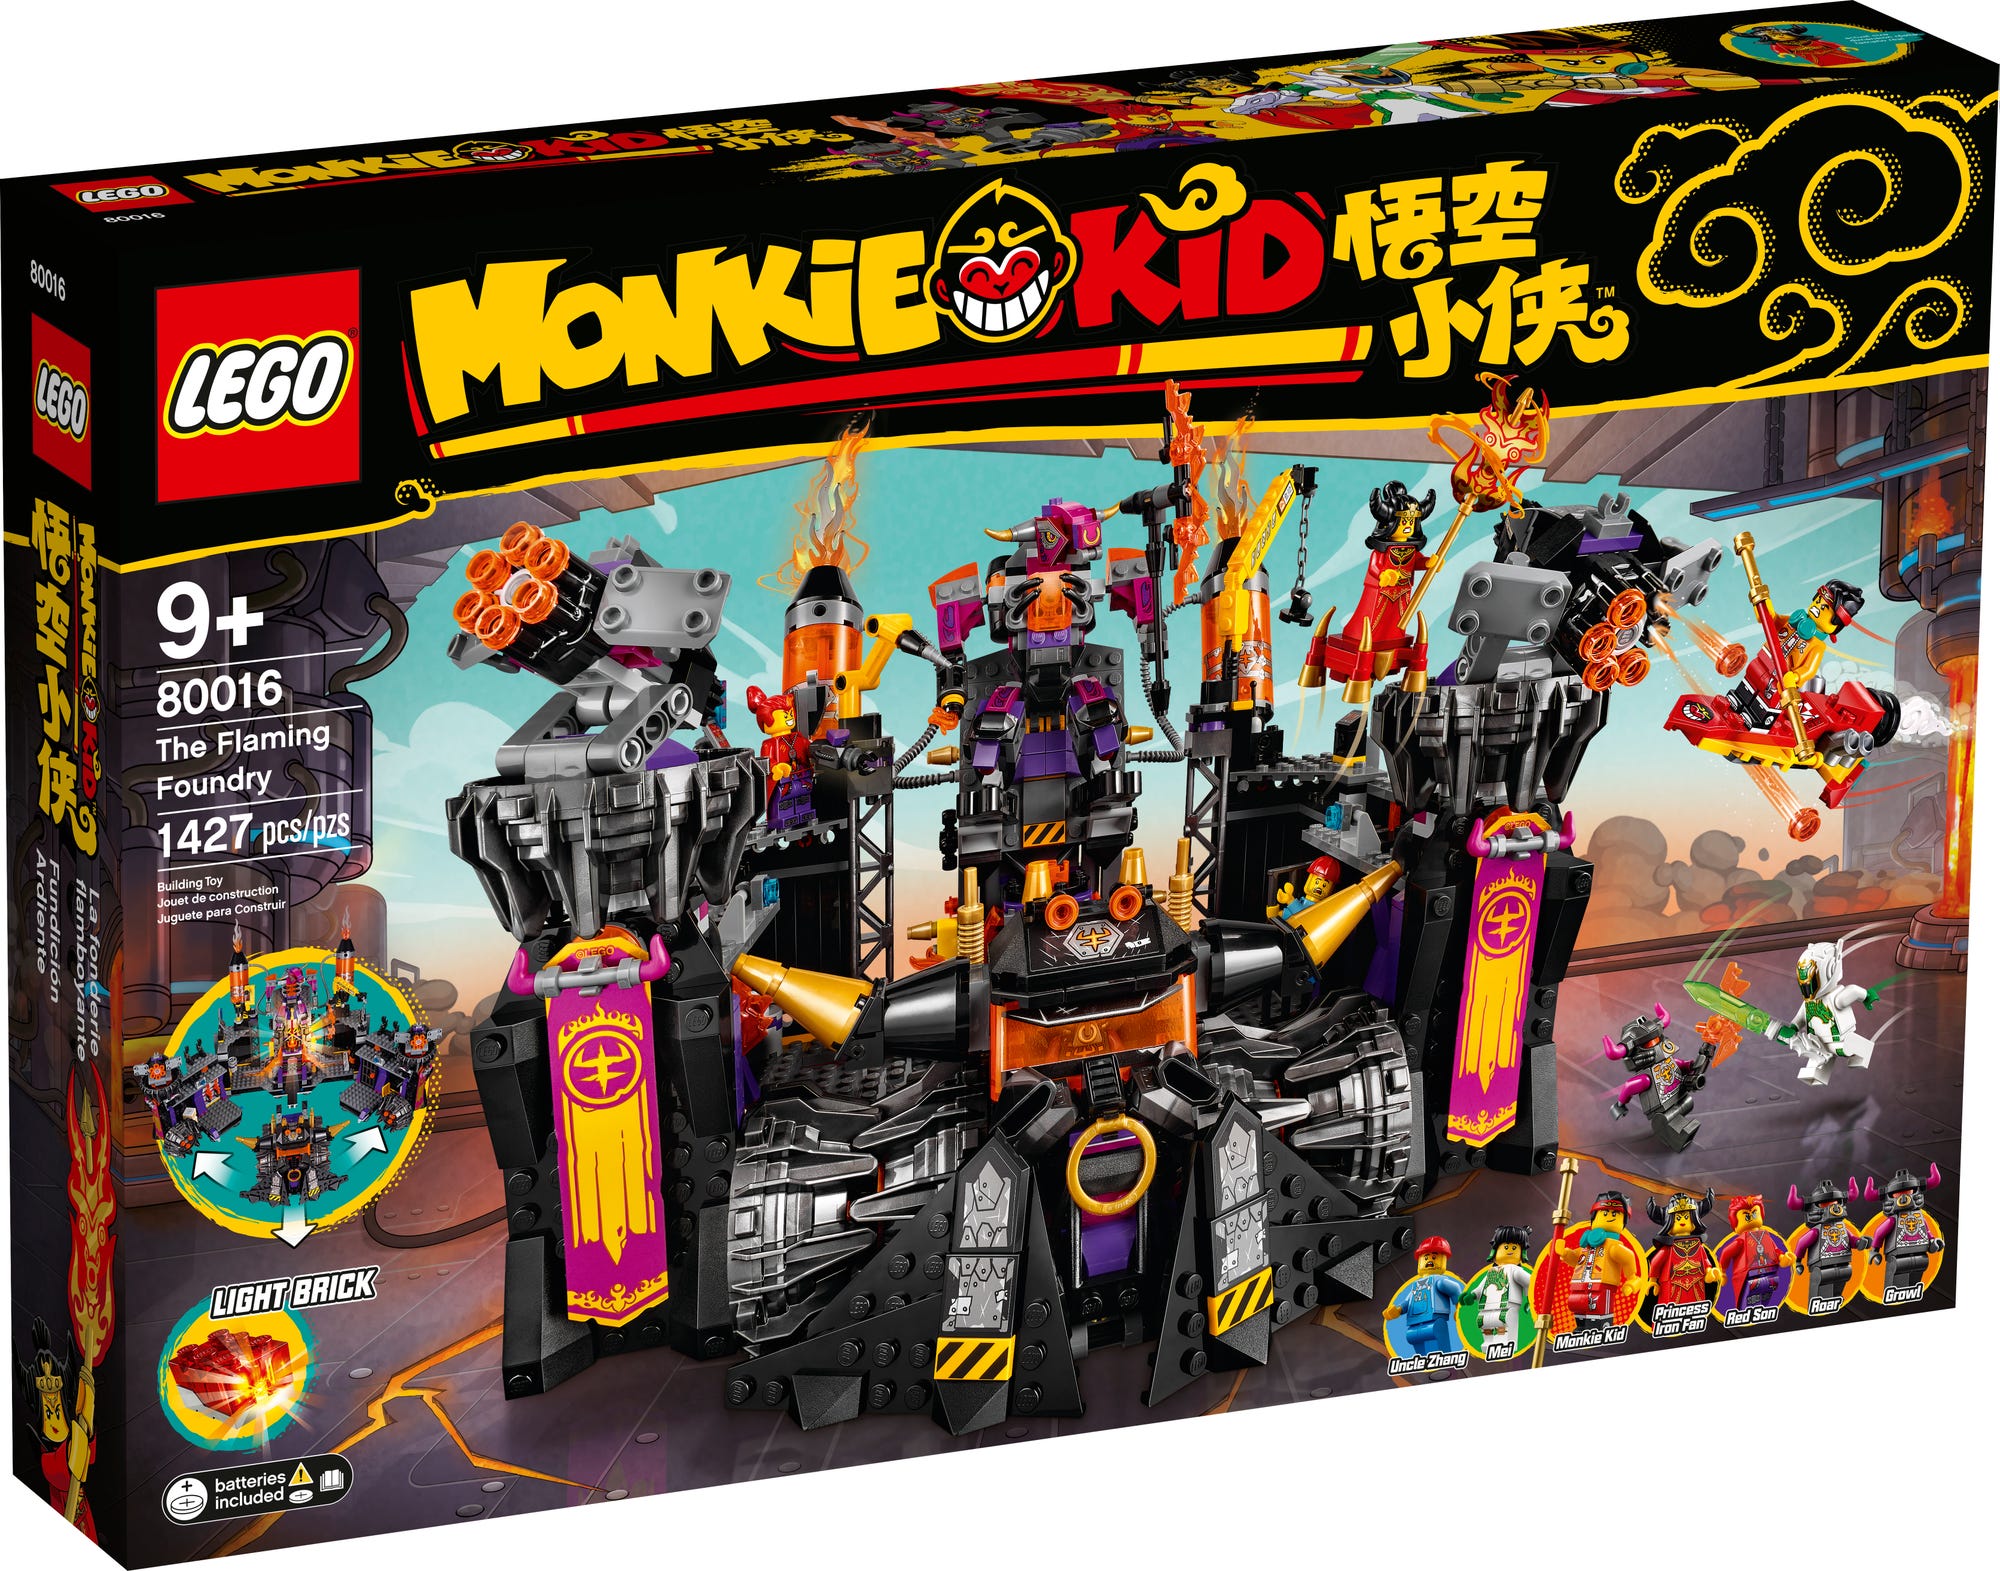 LEGO 80016 Monkie Kid The Flaming Foundry 2